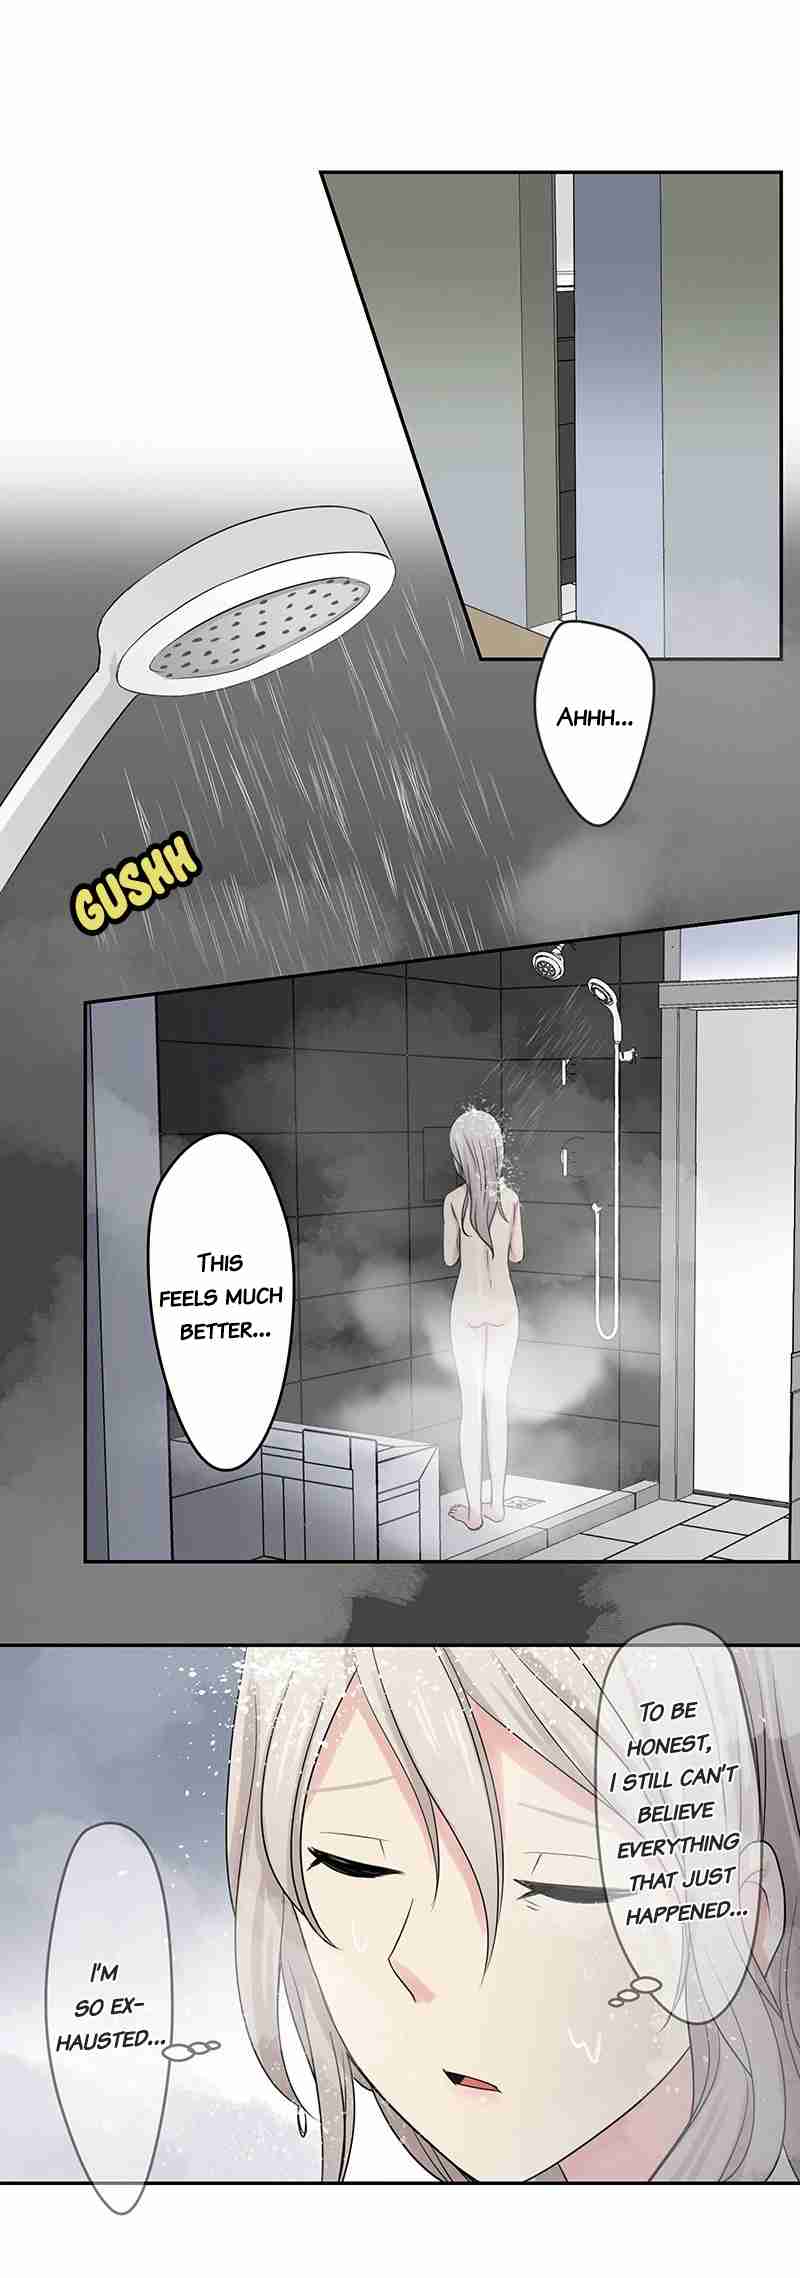 Switched Girls Ch. 9 About Mei Sia (Second Half)